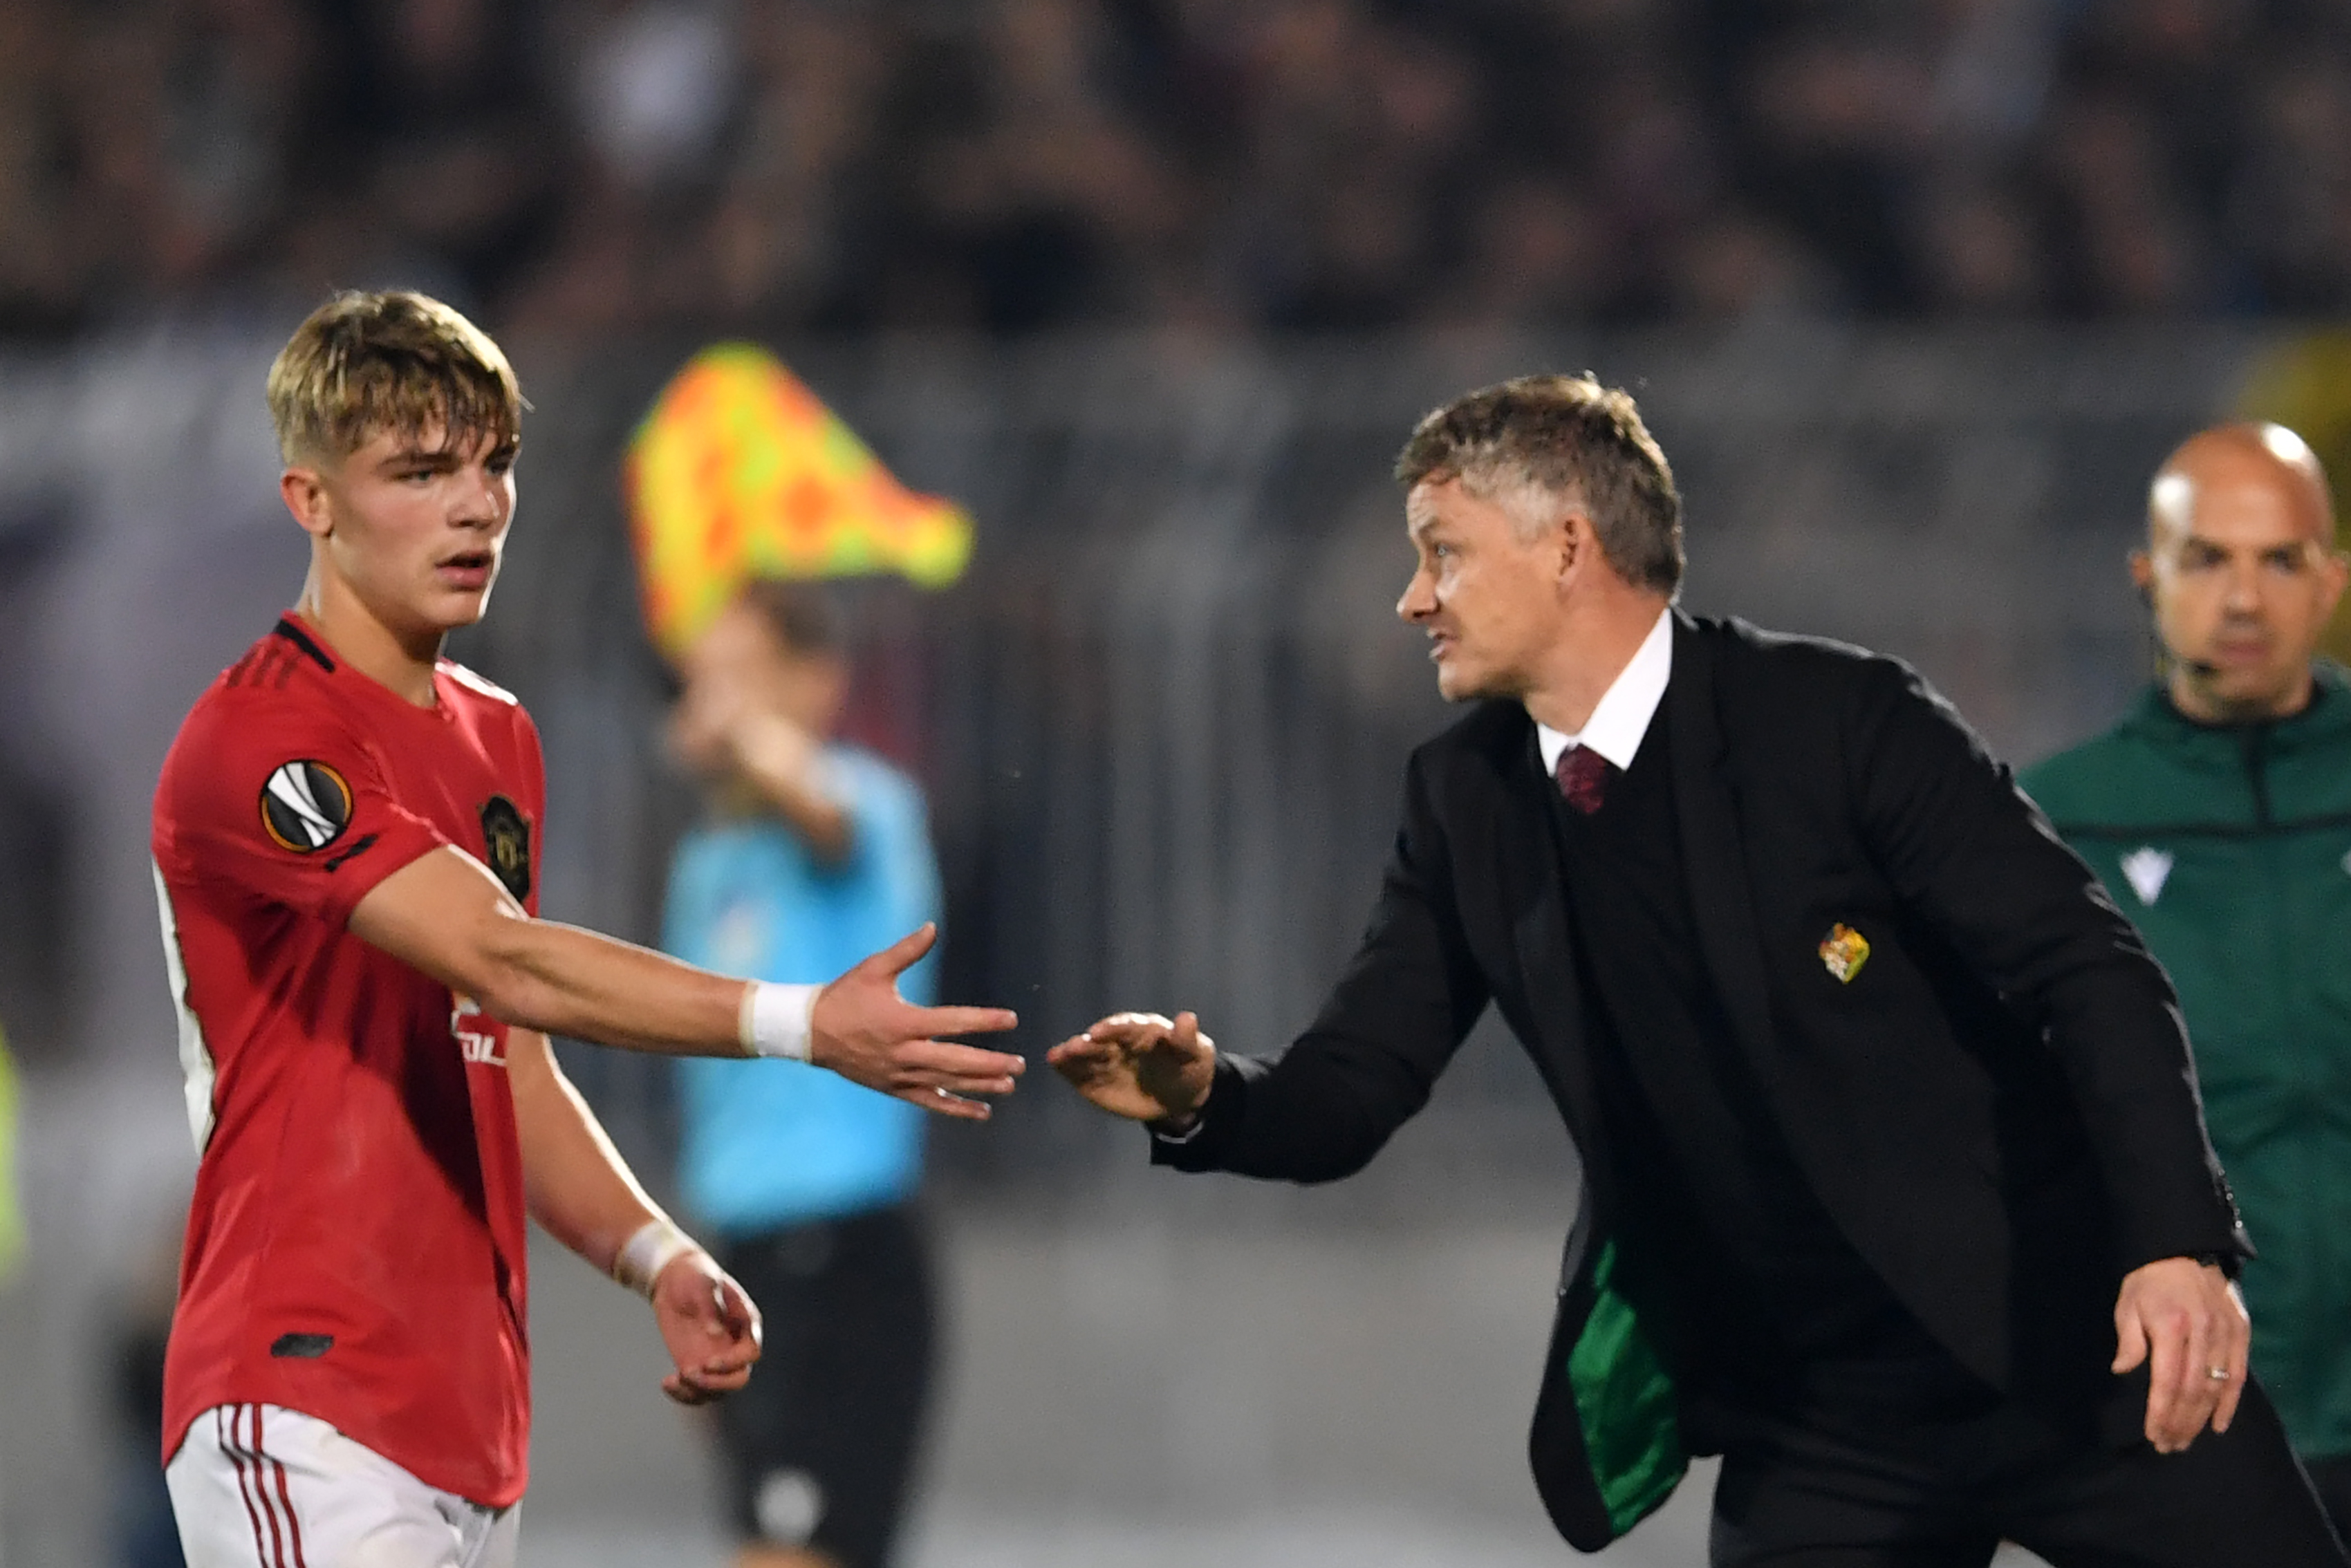 Manchester United's Norwegian manager Ole Gunnar Solskjaer substitutes Machester United's English midfeilder James Garner (L) during the UEFA Europa league group L football match between Partizan Belgrade and Manchester United at the Partizan stadium in Belgrade on October 24, 2019. (Photo by ANDREJ ISAKOVIC / AFP) (Photo by ANDREJ ISAKOVIC/AFP via Getty Images)